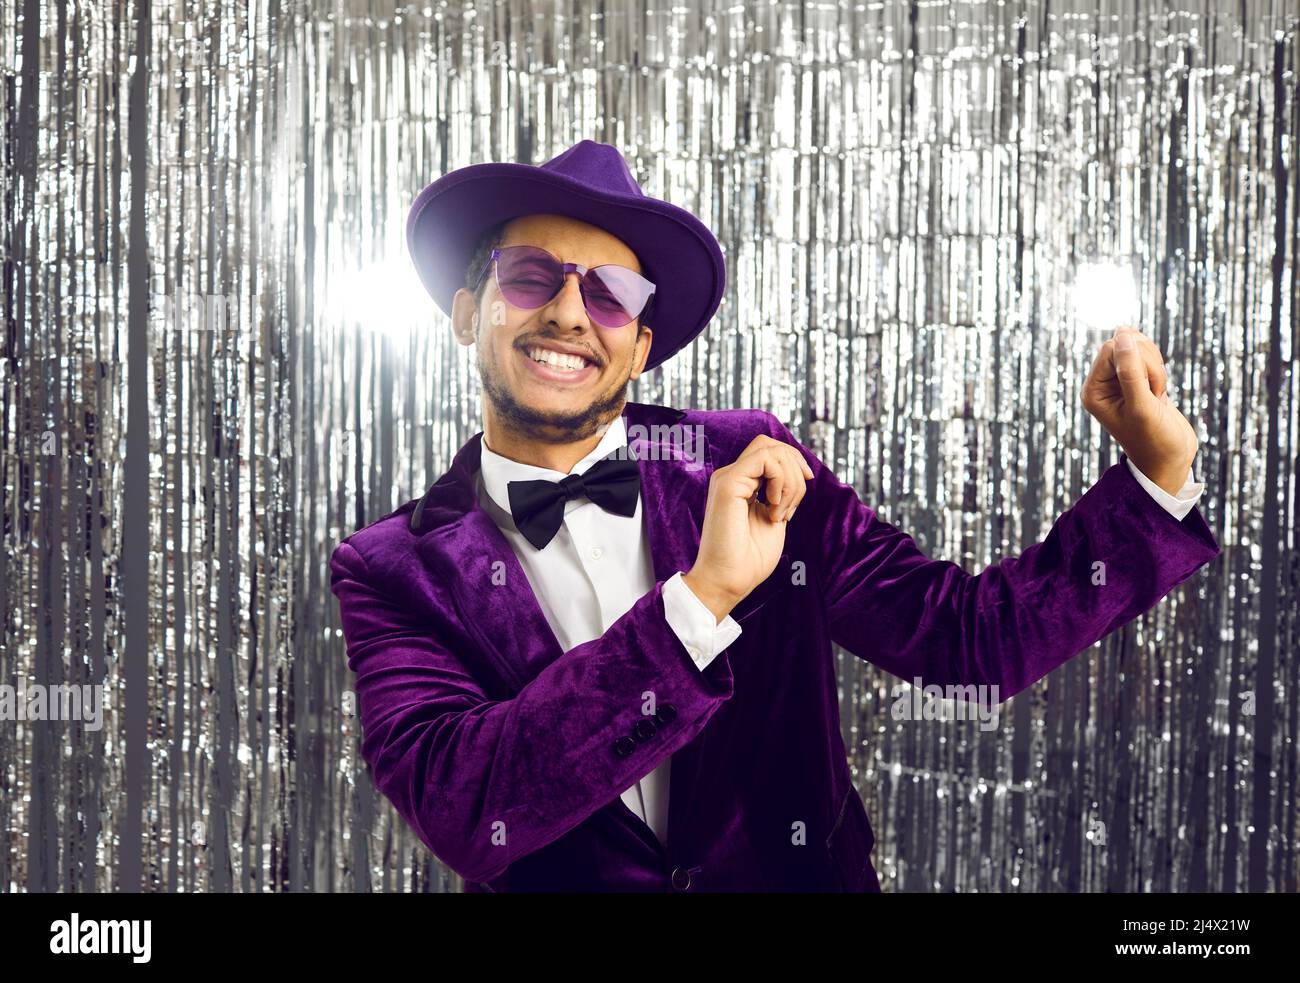 Happy funny young guy wearing purple jacket, hat and sunglasses dancing at party Stock Photo